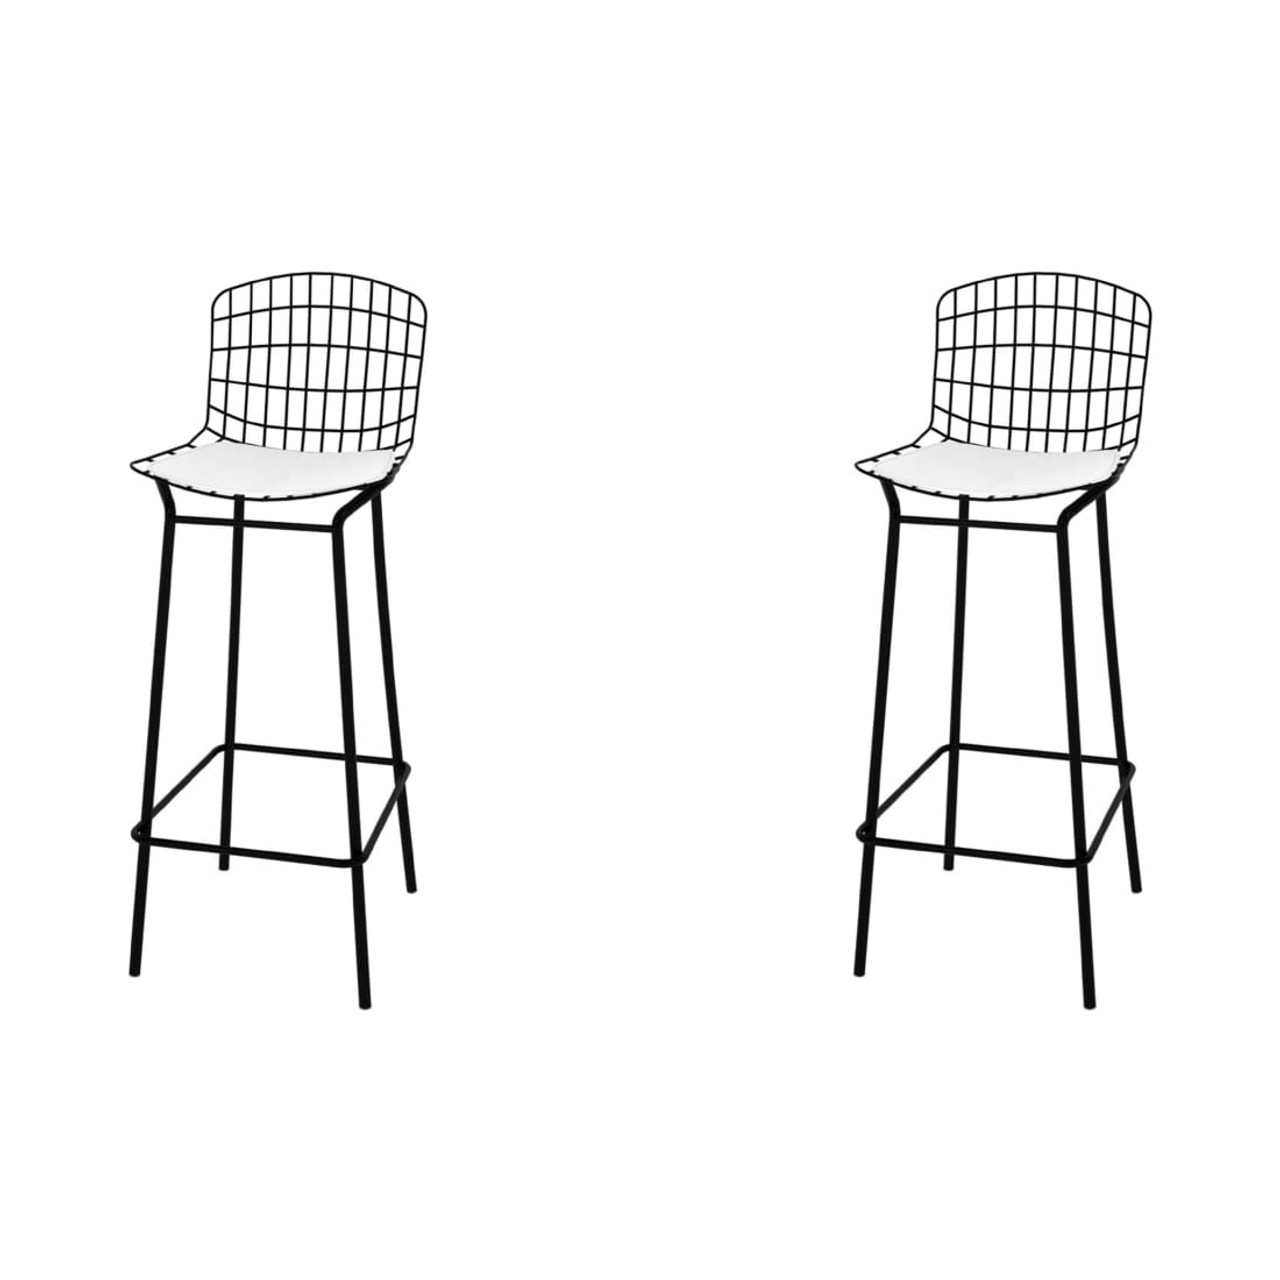 Danube Dining Chair in Silver (Set of 2)